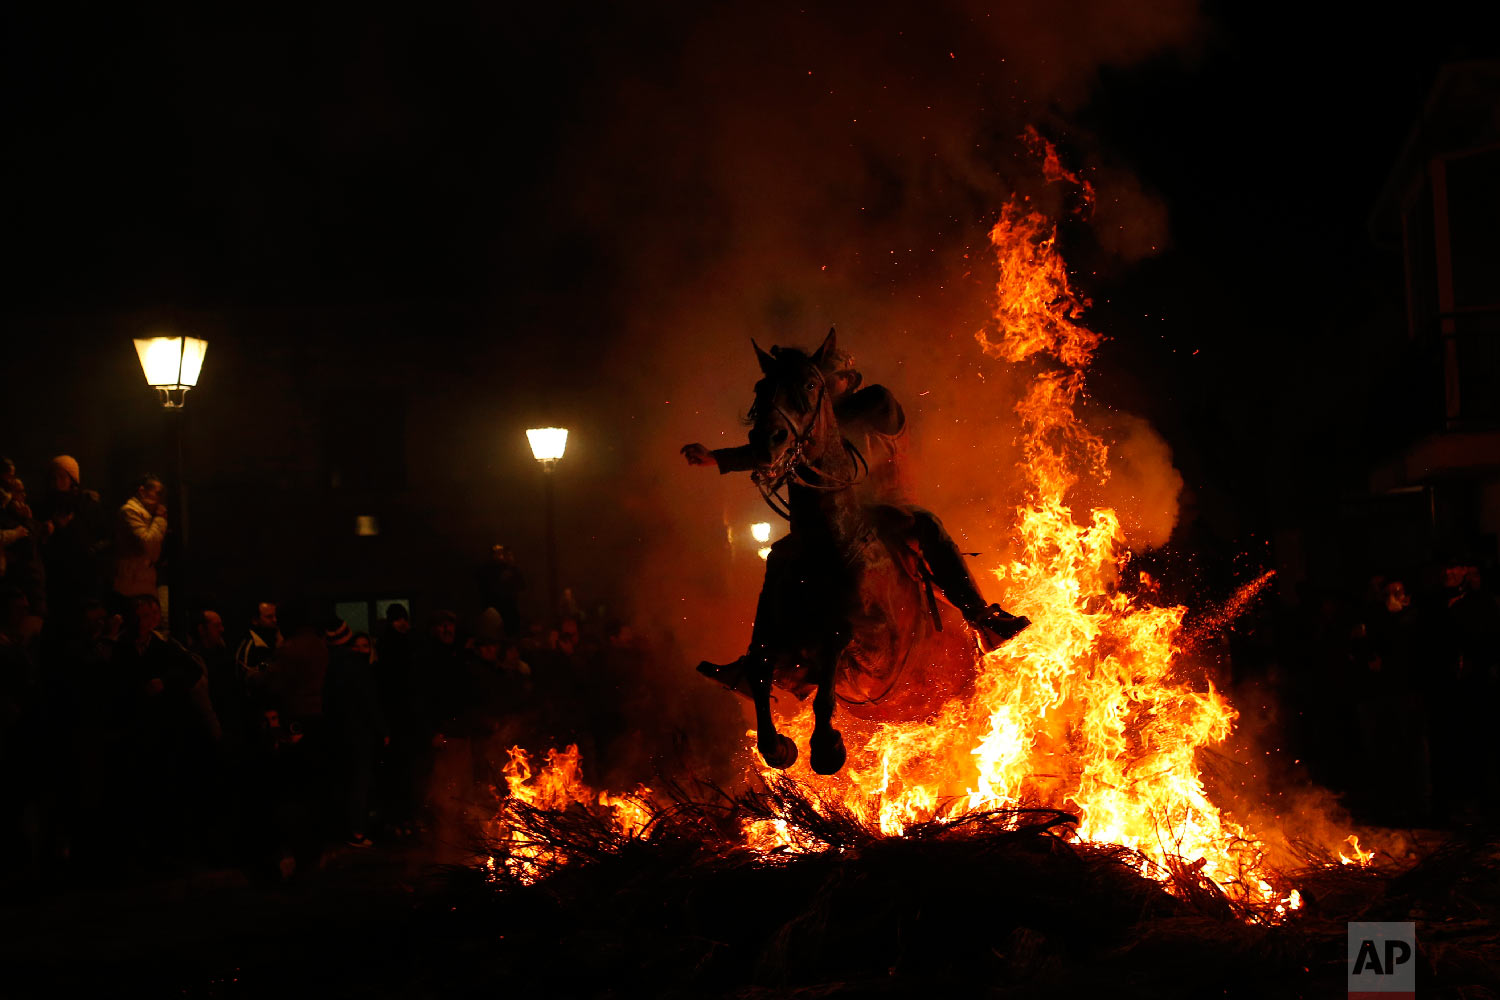  A man rides a horse through a bonfire as part of a ritual in honor of Saint Anthony the Abbot, the patron saint of domestic animals, in San Bartolome de Pinares, Spain on Jan. 16, 2018.(AP Photo/Francisco Seco) 